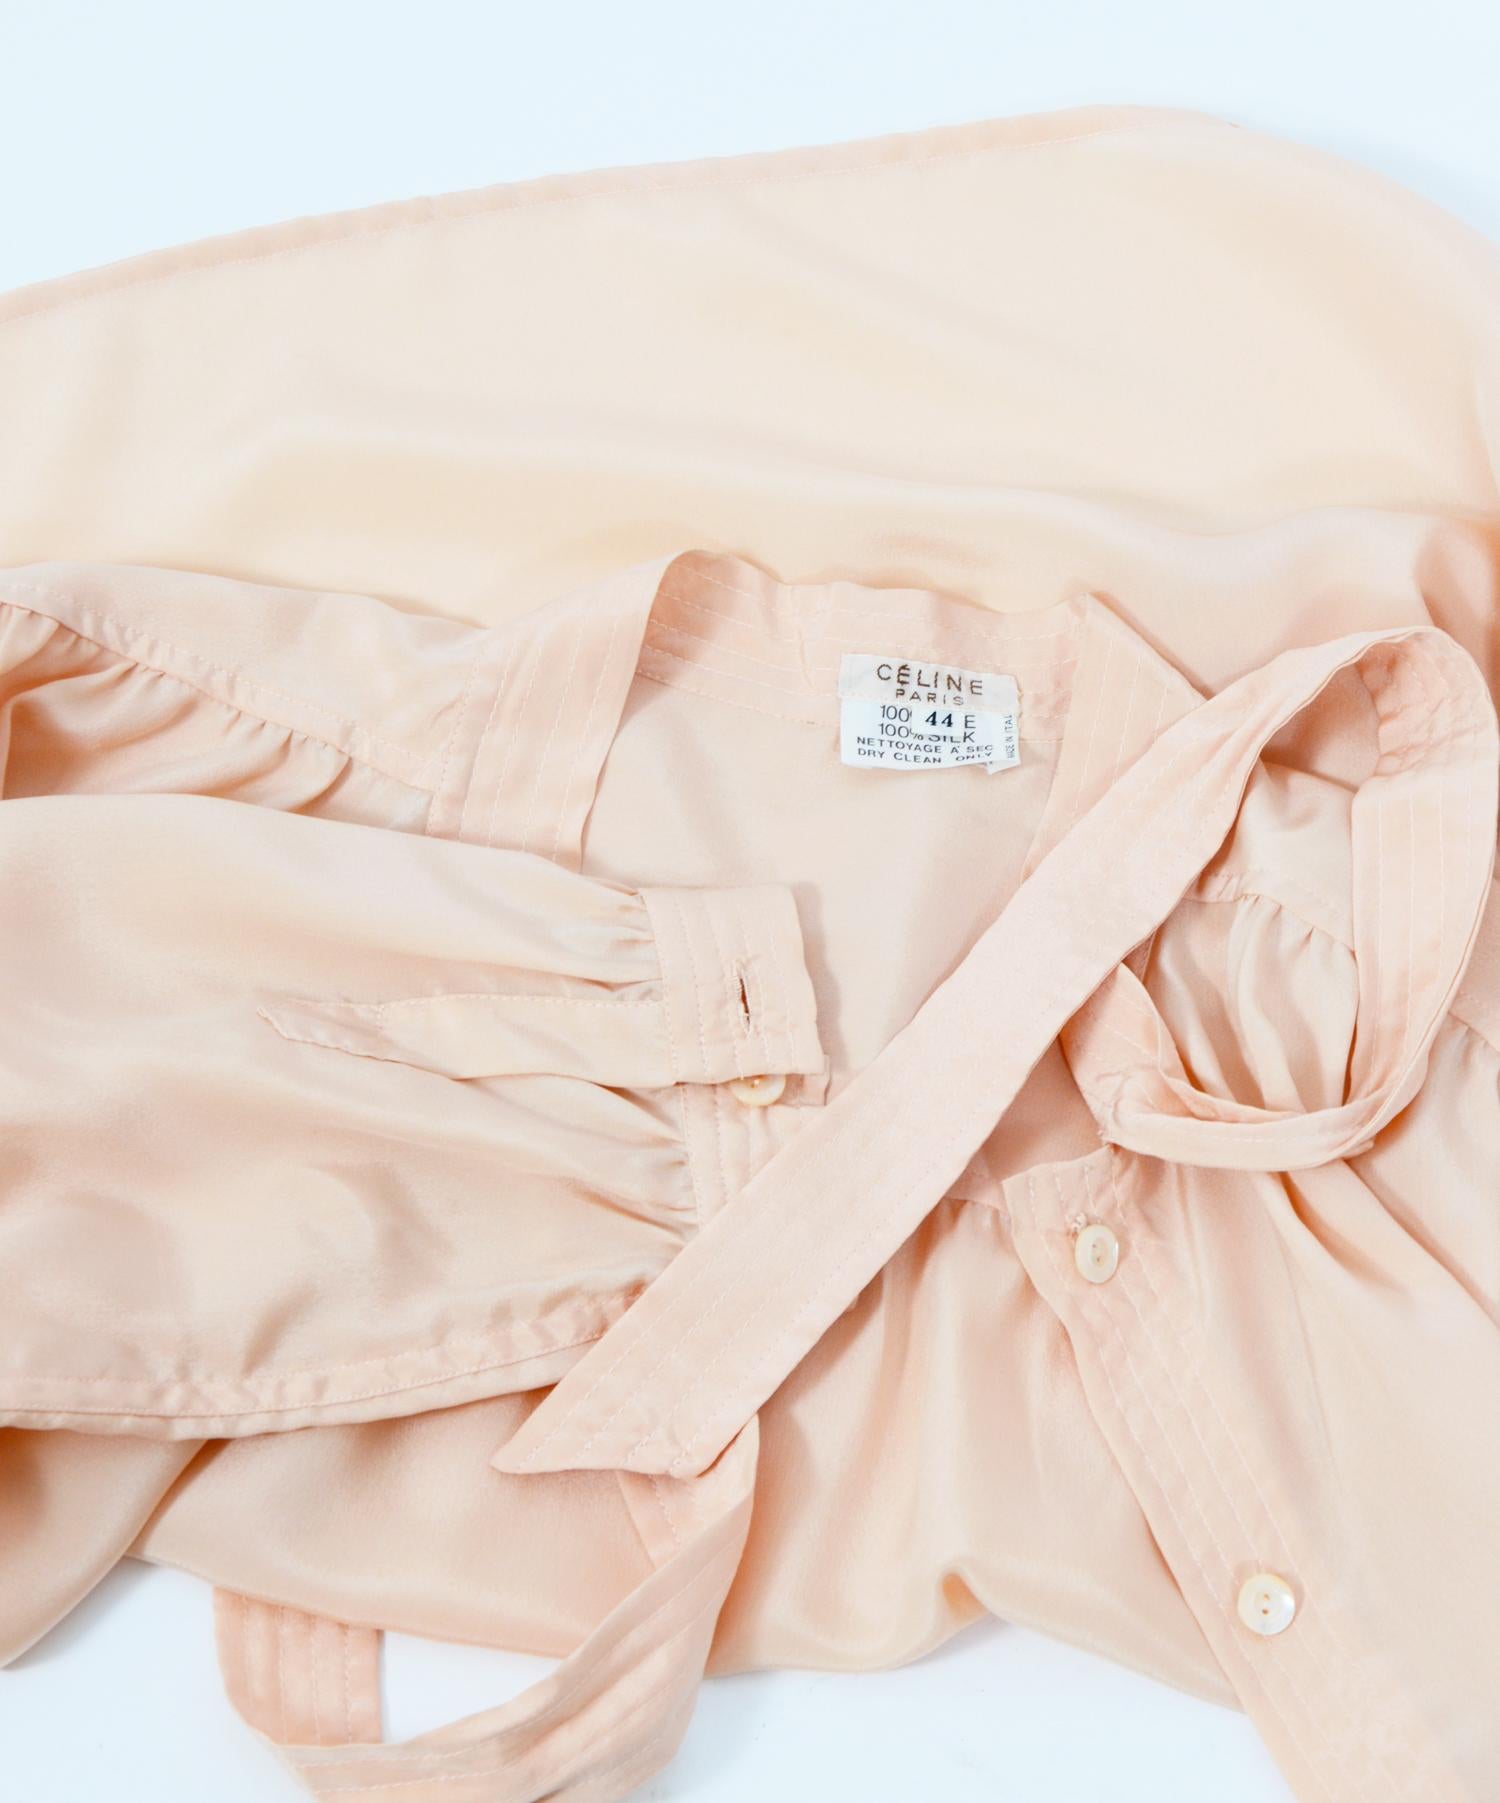 Exquisite CELINE nude or peach color silk blouse.  Signed buttons + logo on the front of the shirt. French Size 44 100% silk Measurements are taken flat Sh to Sh 16,5inch/42cm - Ua to UA 20inch/51cm(x2) - Total Length 26inch/56cm - Sleeve 24inch/61cm